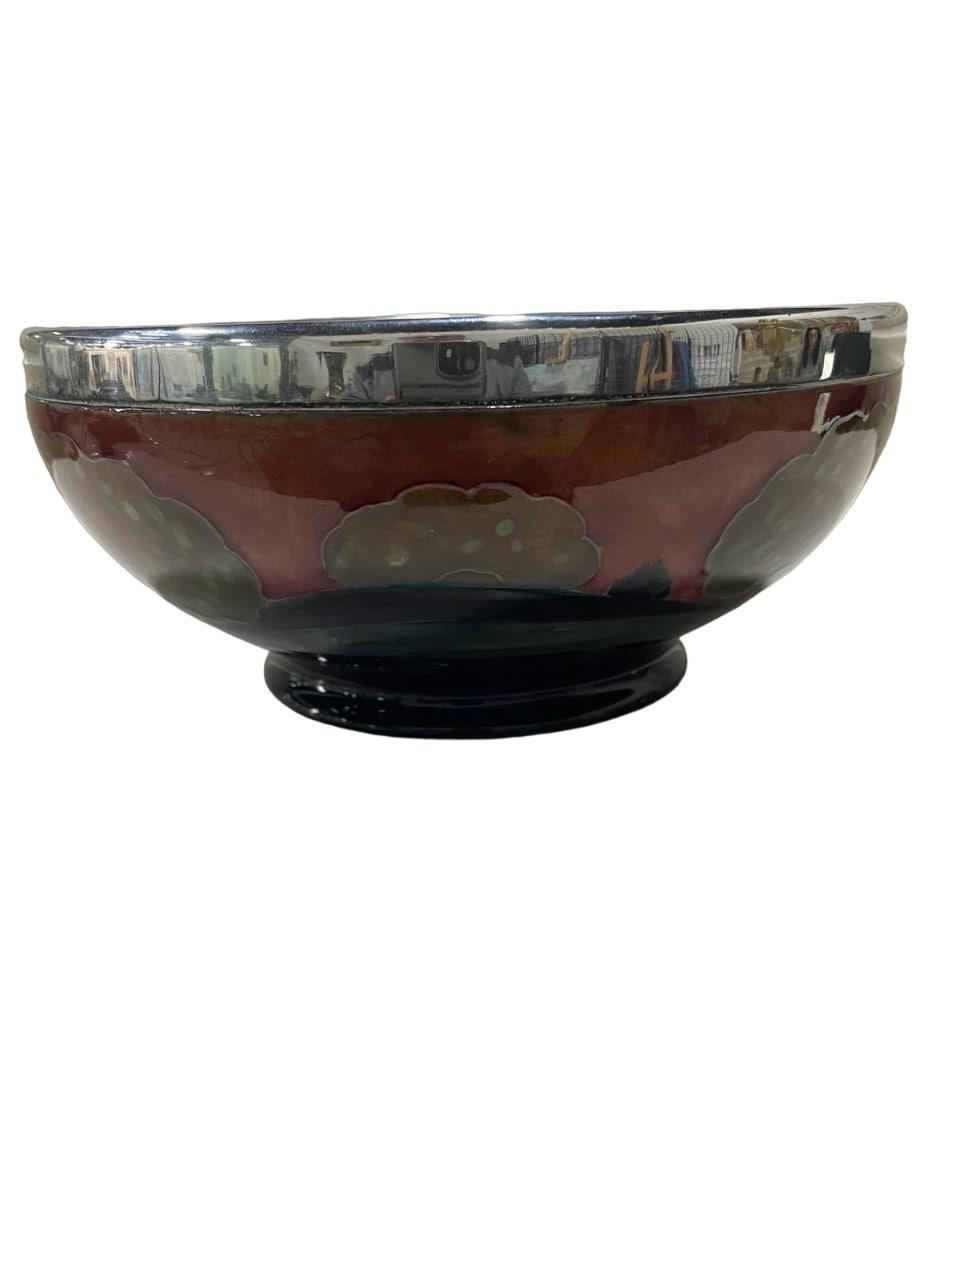 Earthenware MOORCROFT William Hutton & Sns Eventide pattern footed LARGE BOWL silver overlay For Sale